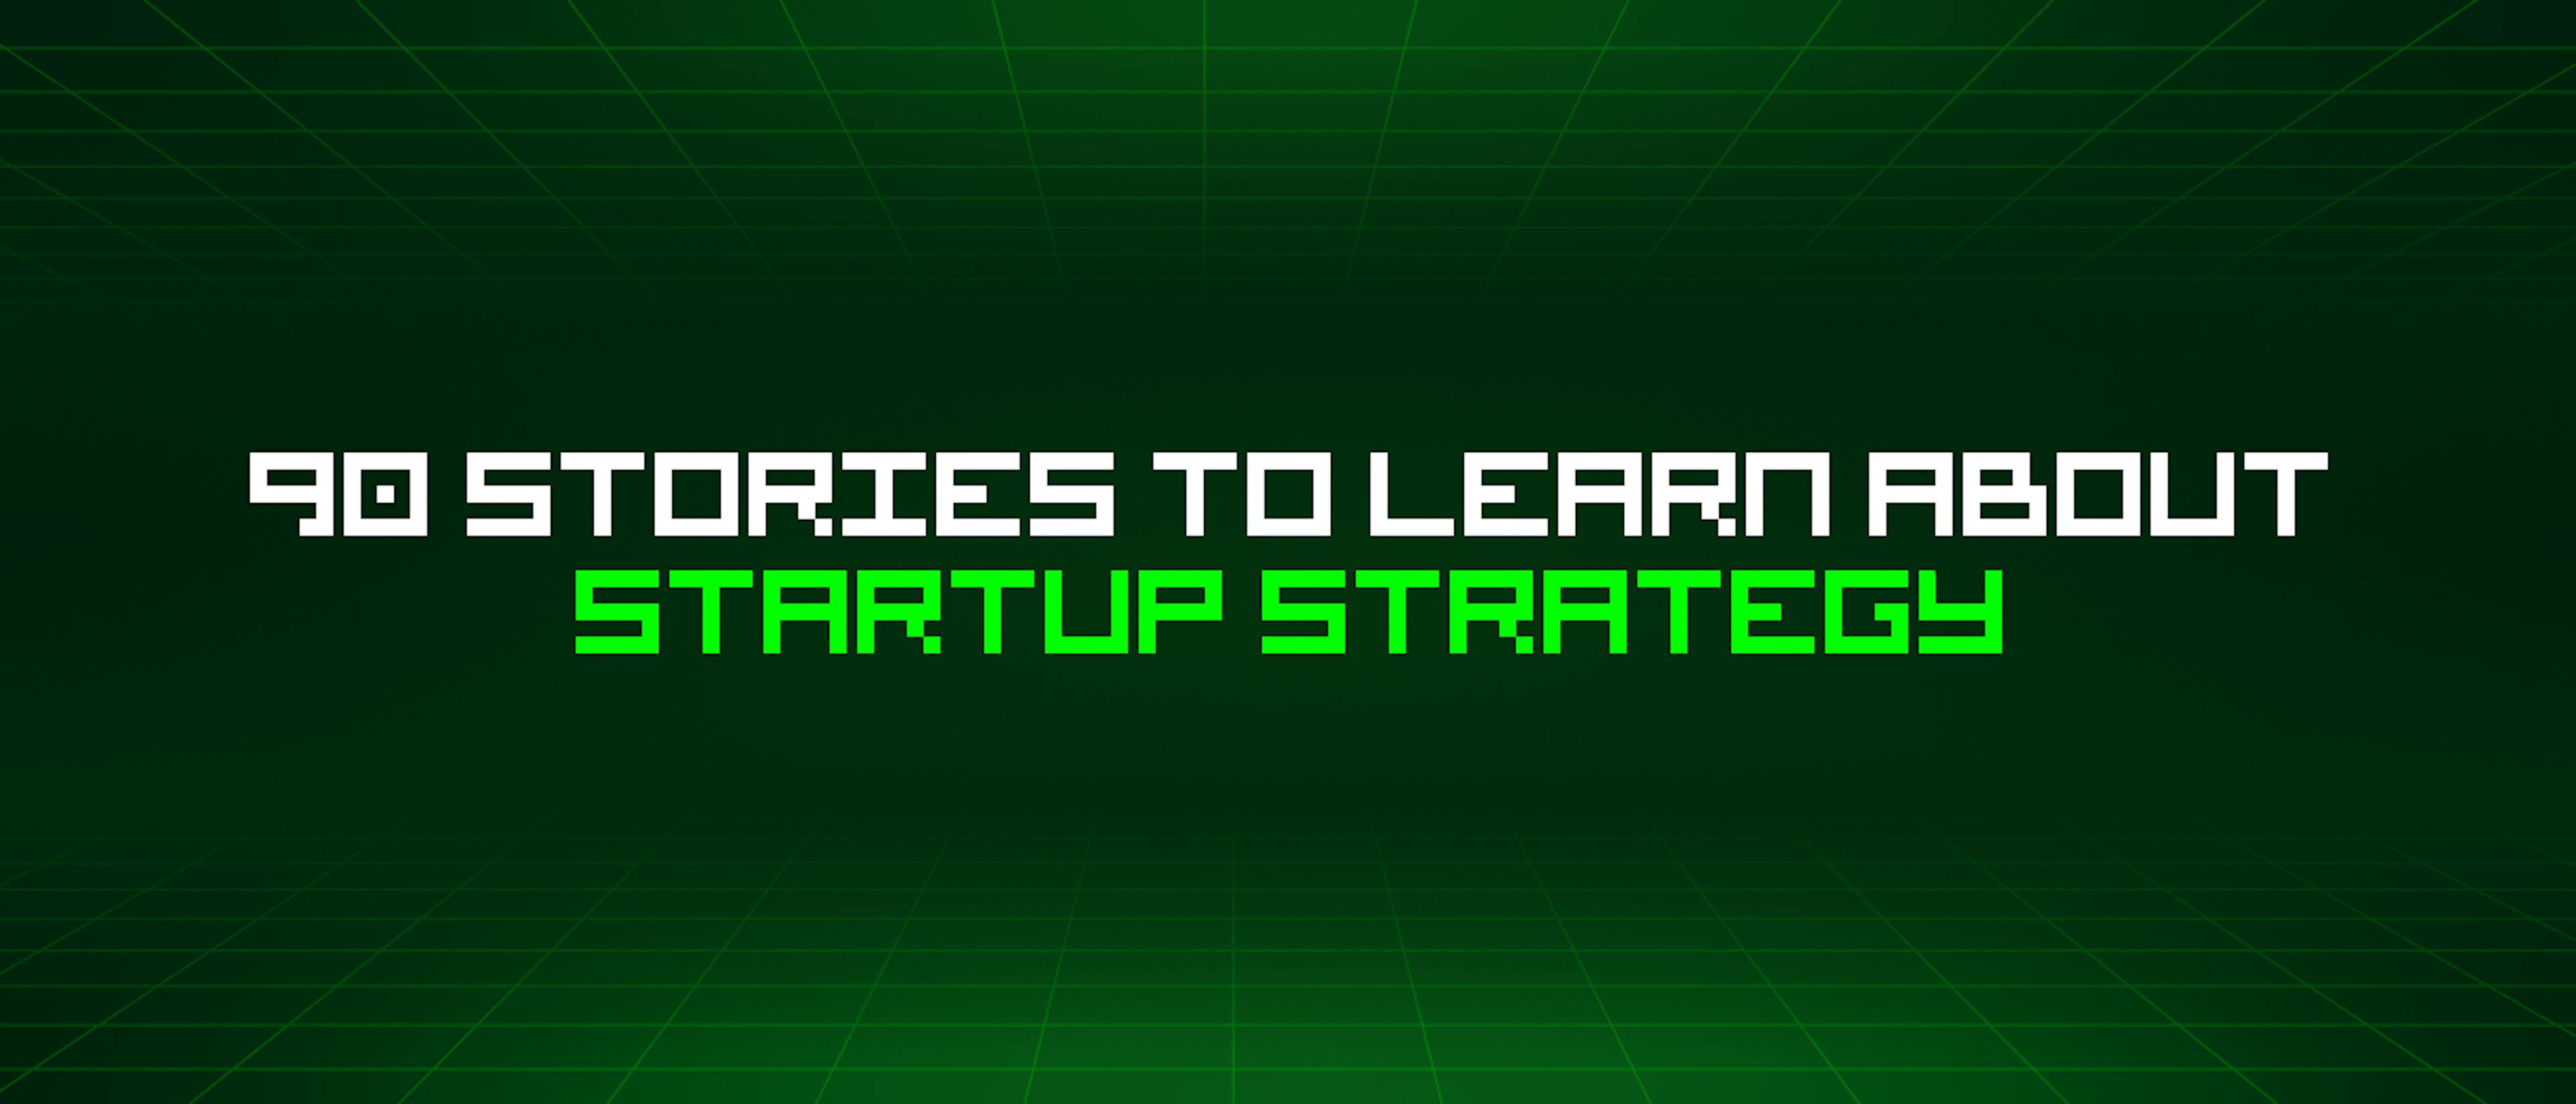 featured image - 90 Stories To Learn About Startup Strategy